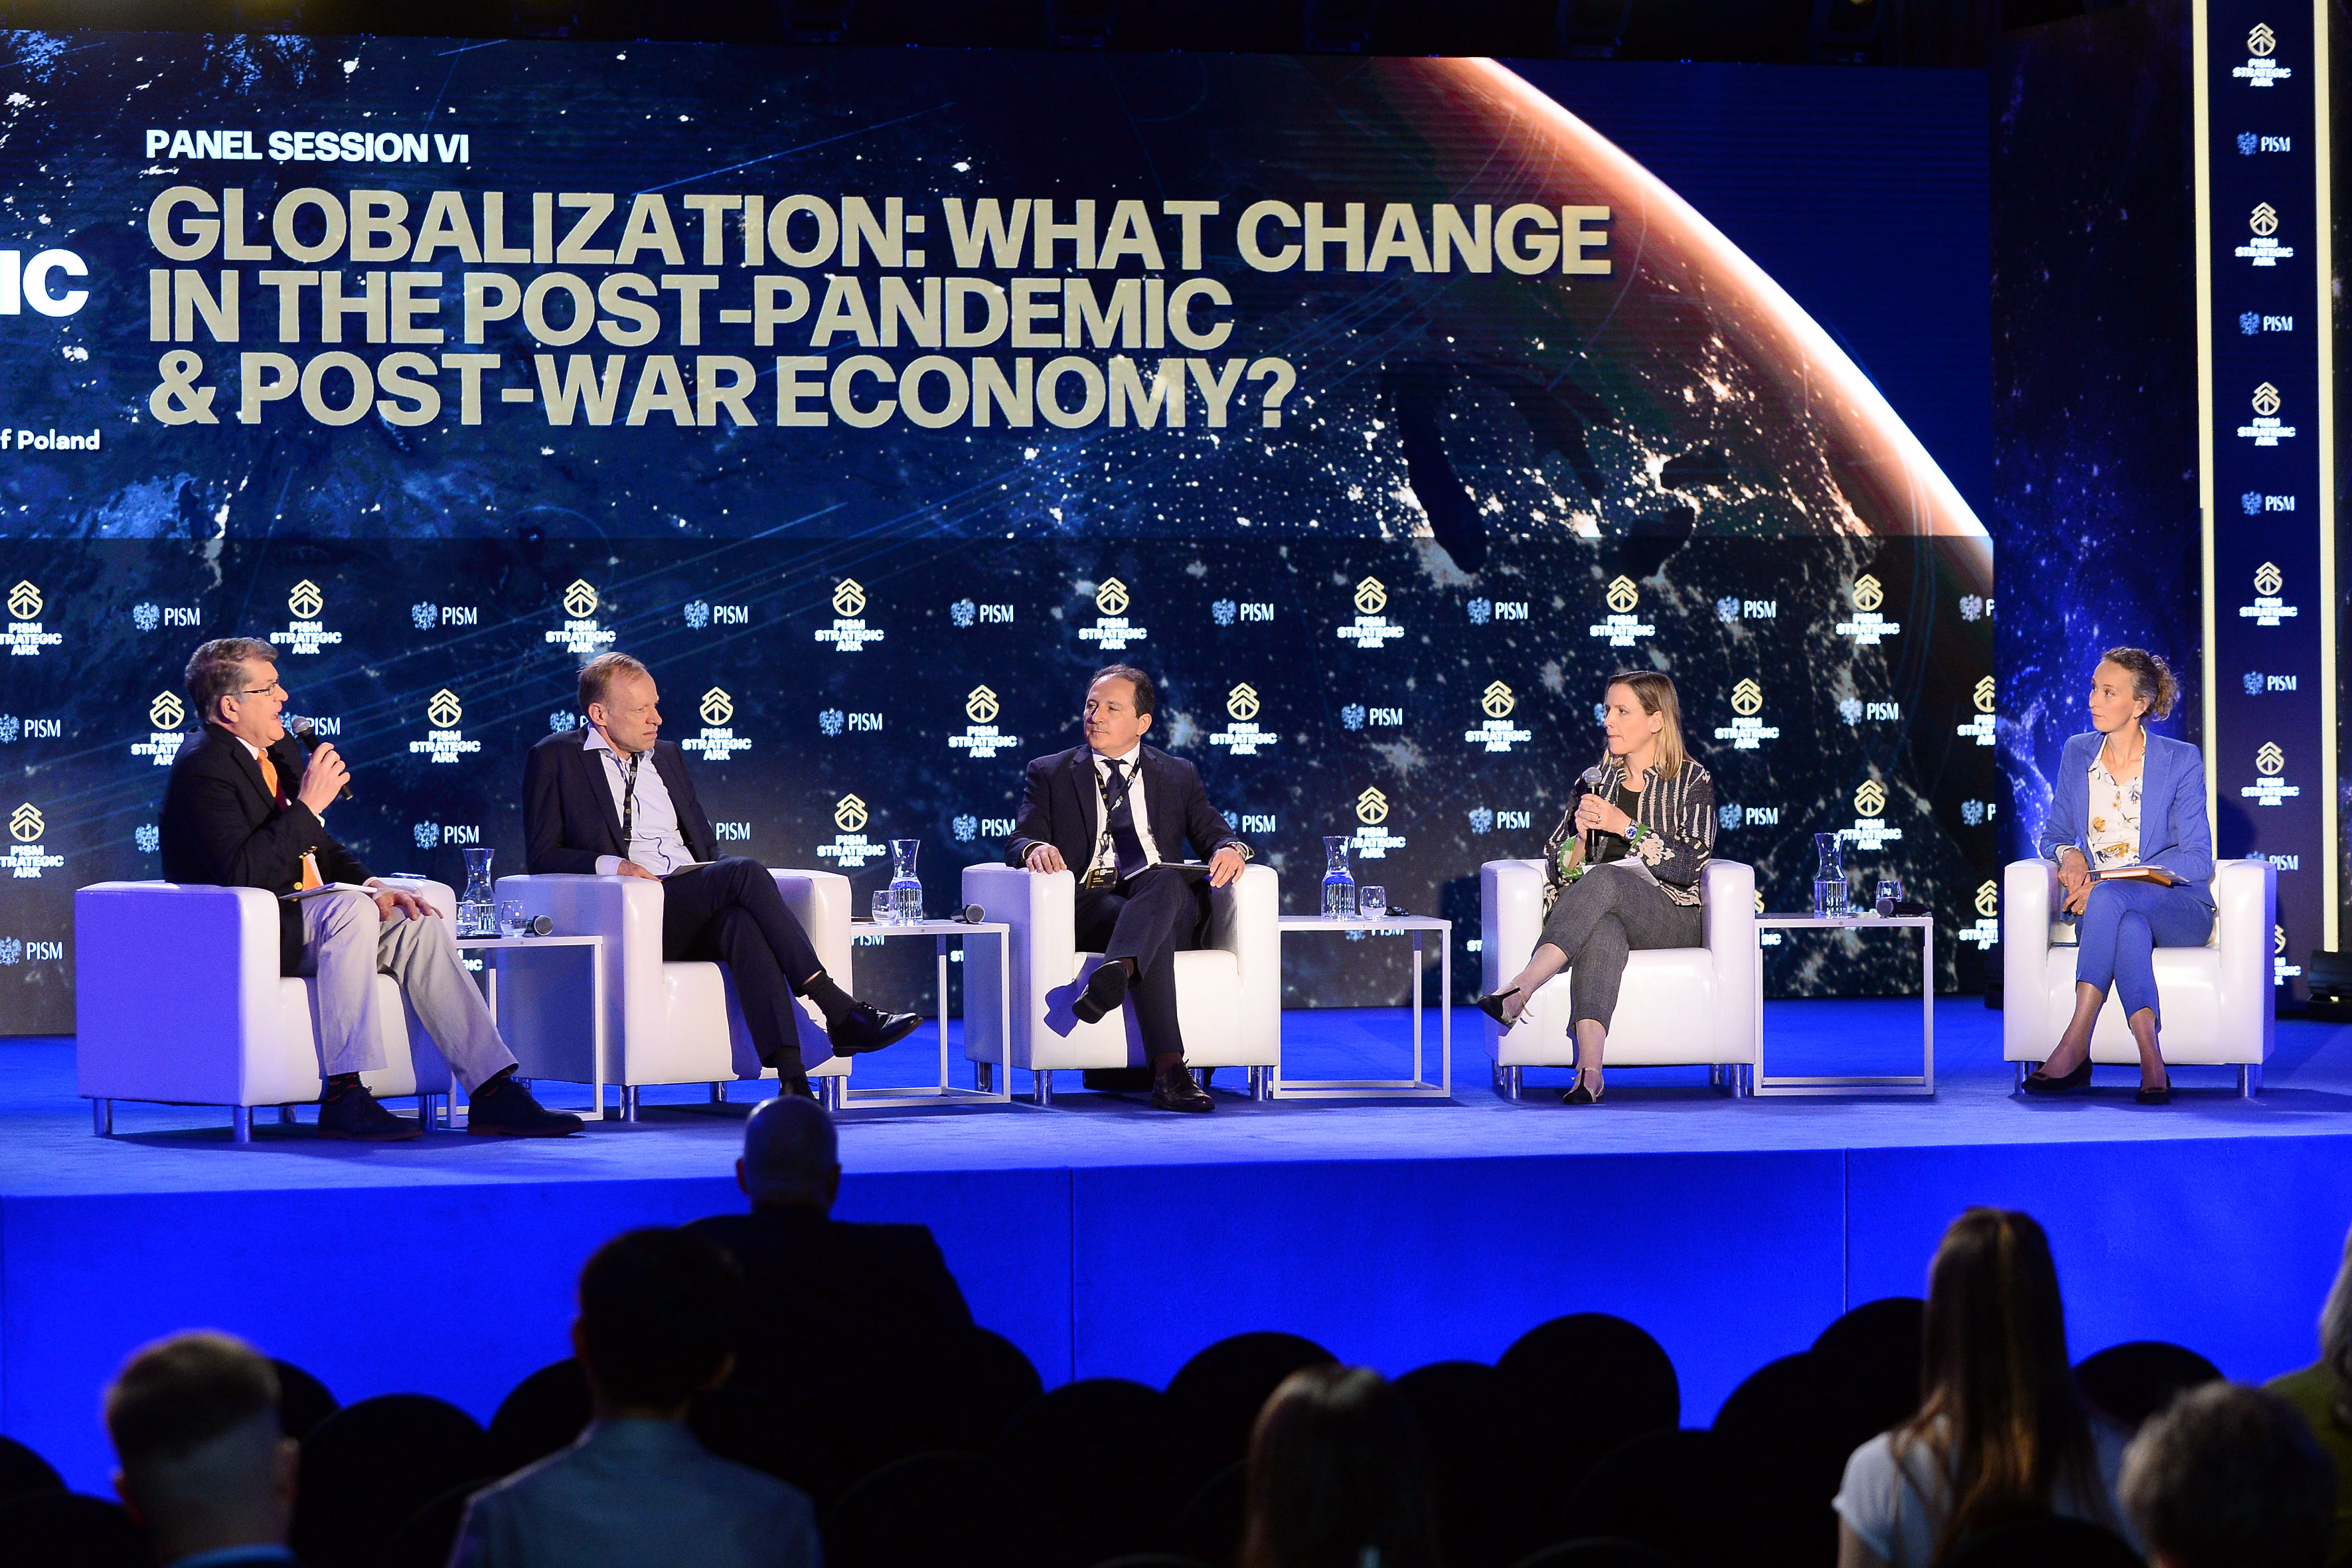 Panel Session VI—Globalization: What Change in the Post-Pandemic & Post-War Economy?